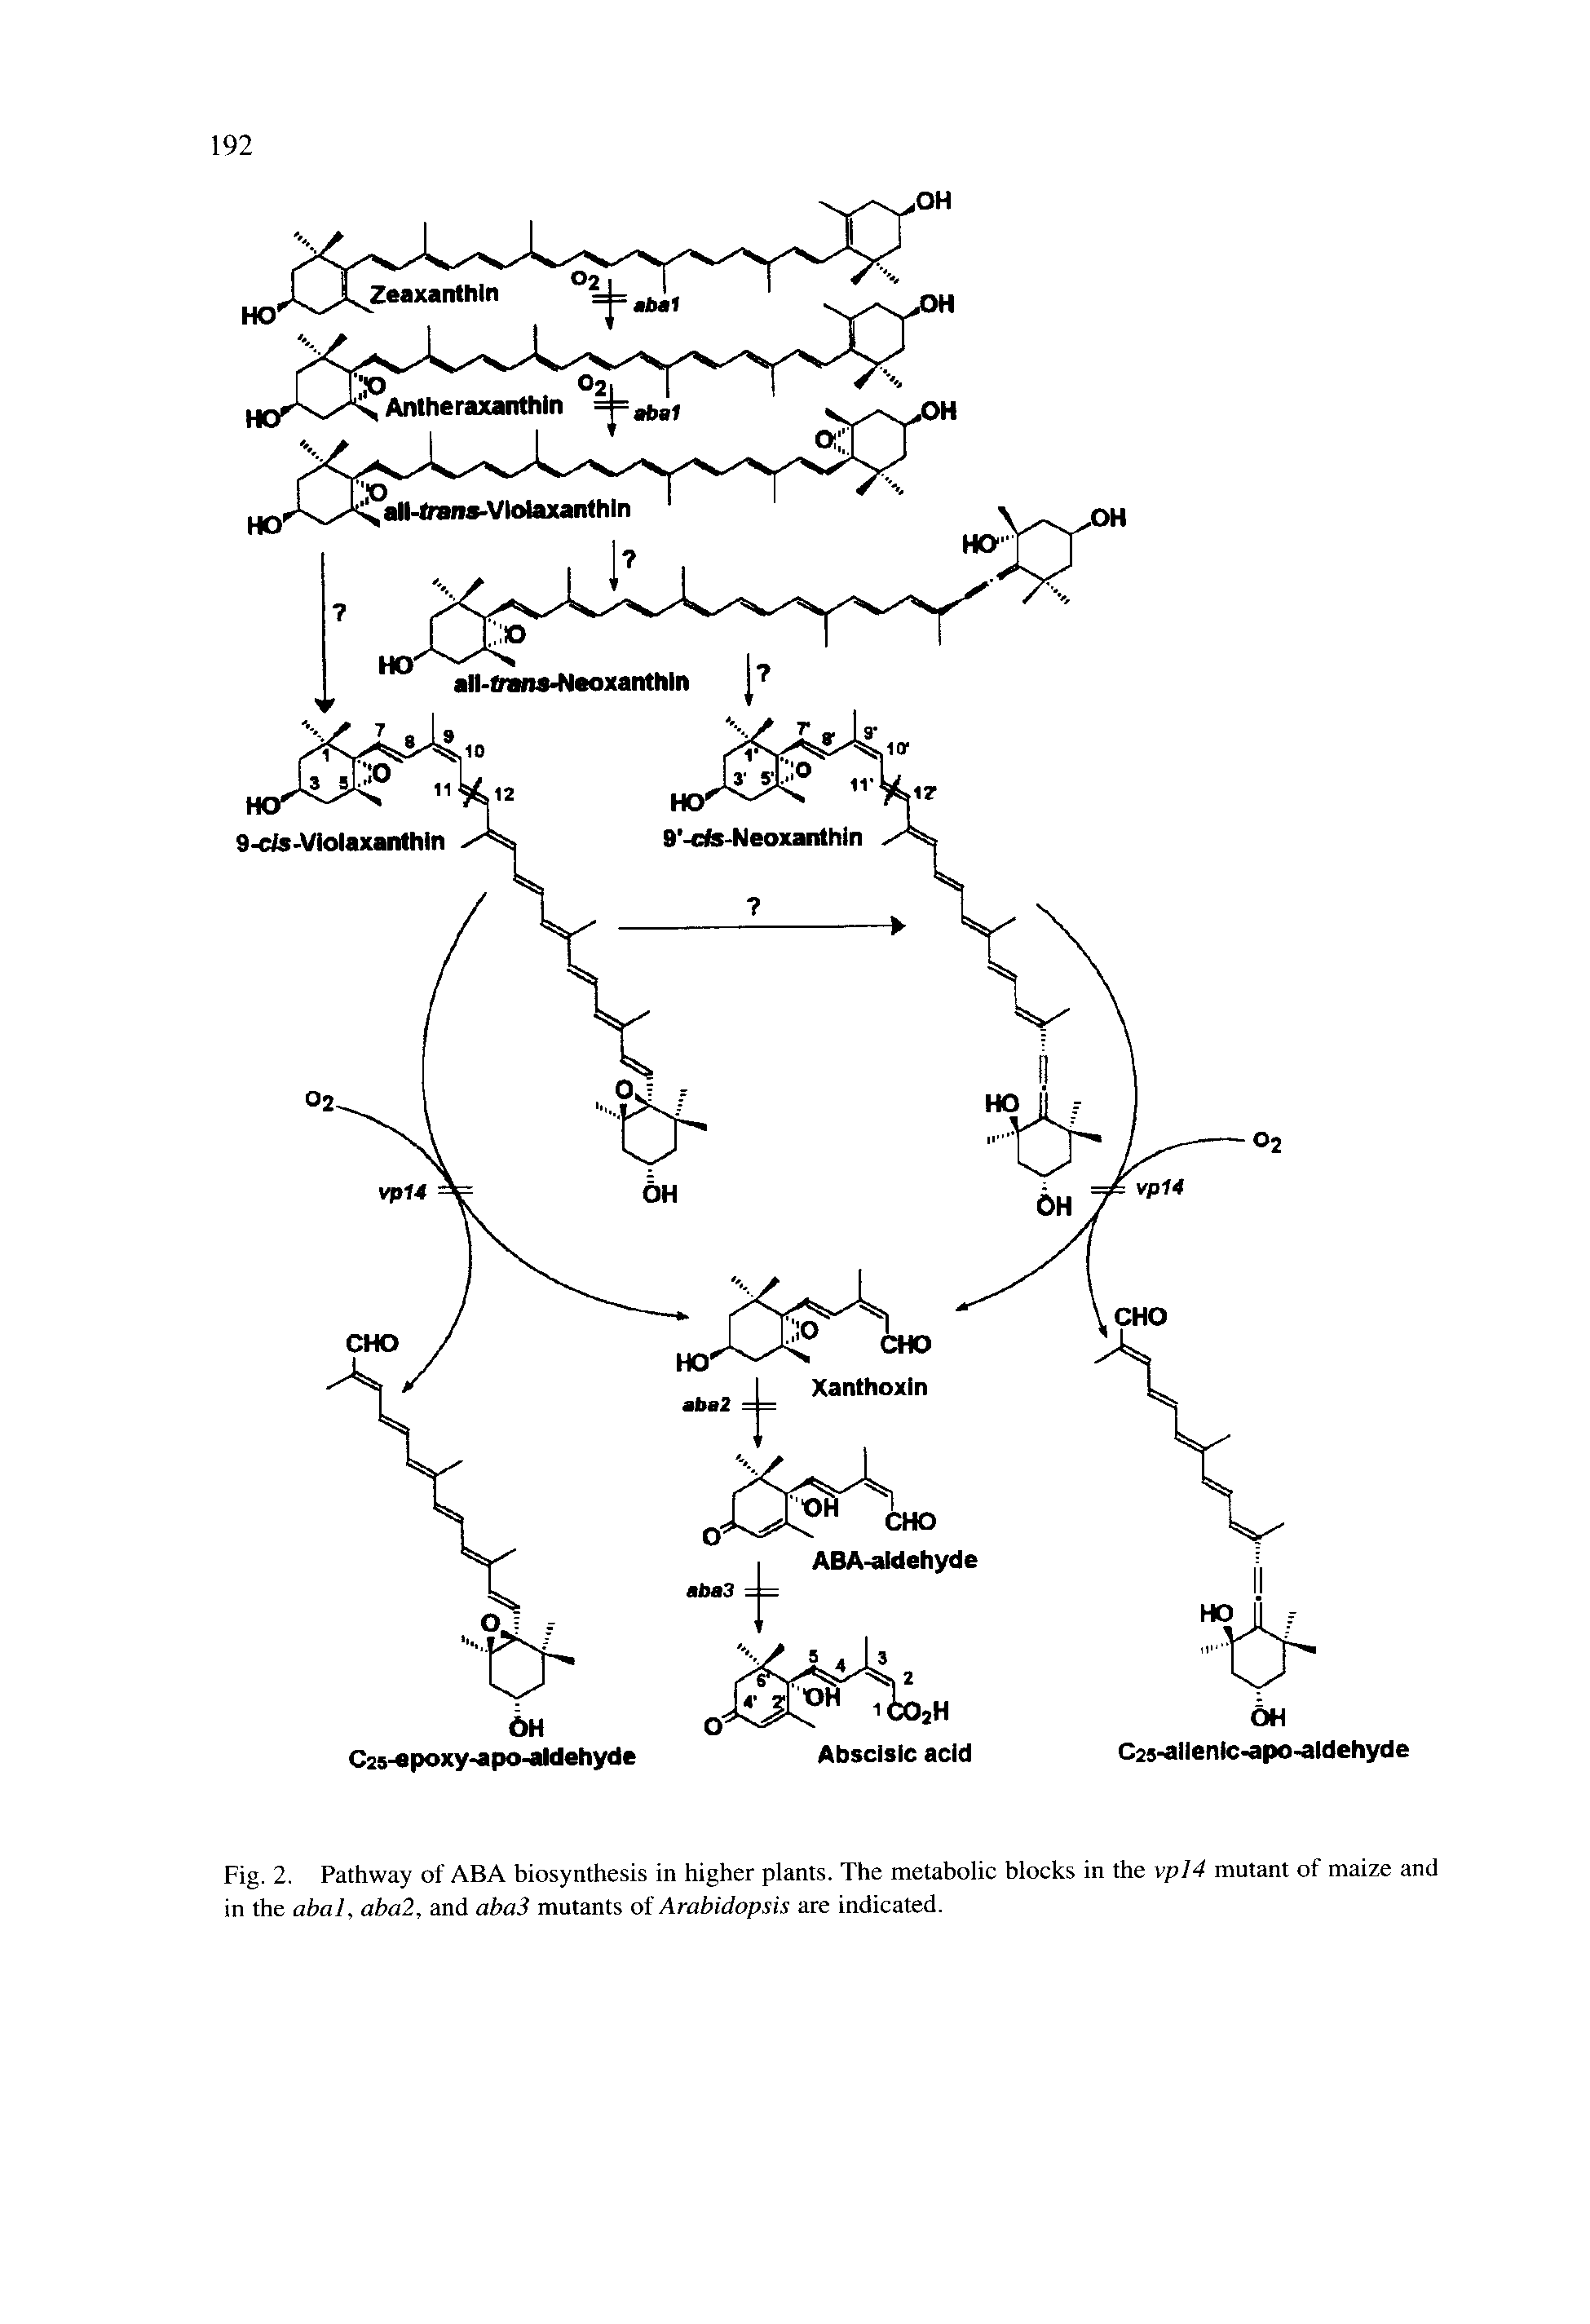 Fig. 2. Pathway of ABA biosynthesis in higher plants. The metabolic blocks in the vpl4 mutant of maize and in the abal, aba2, and abaS mutants of Arabidopsis are indicated.